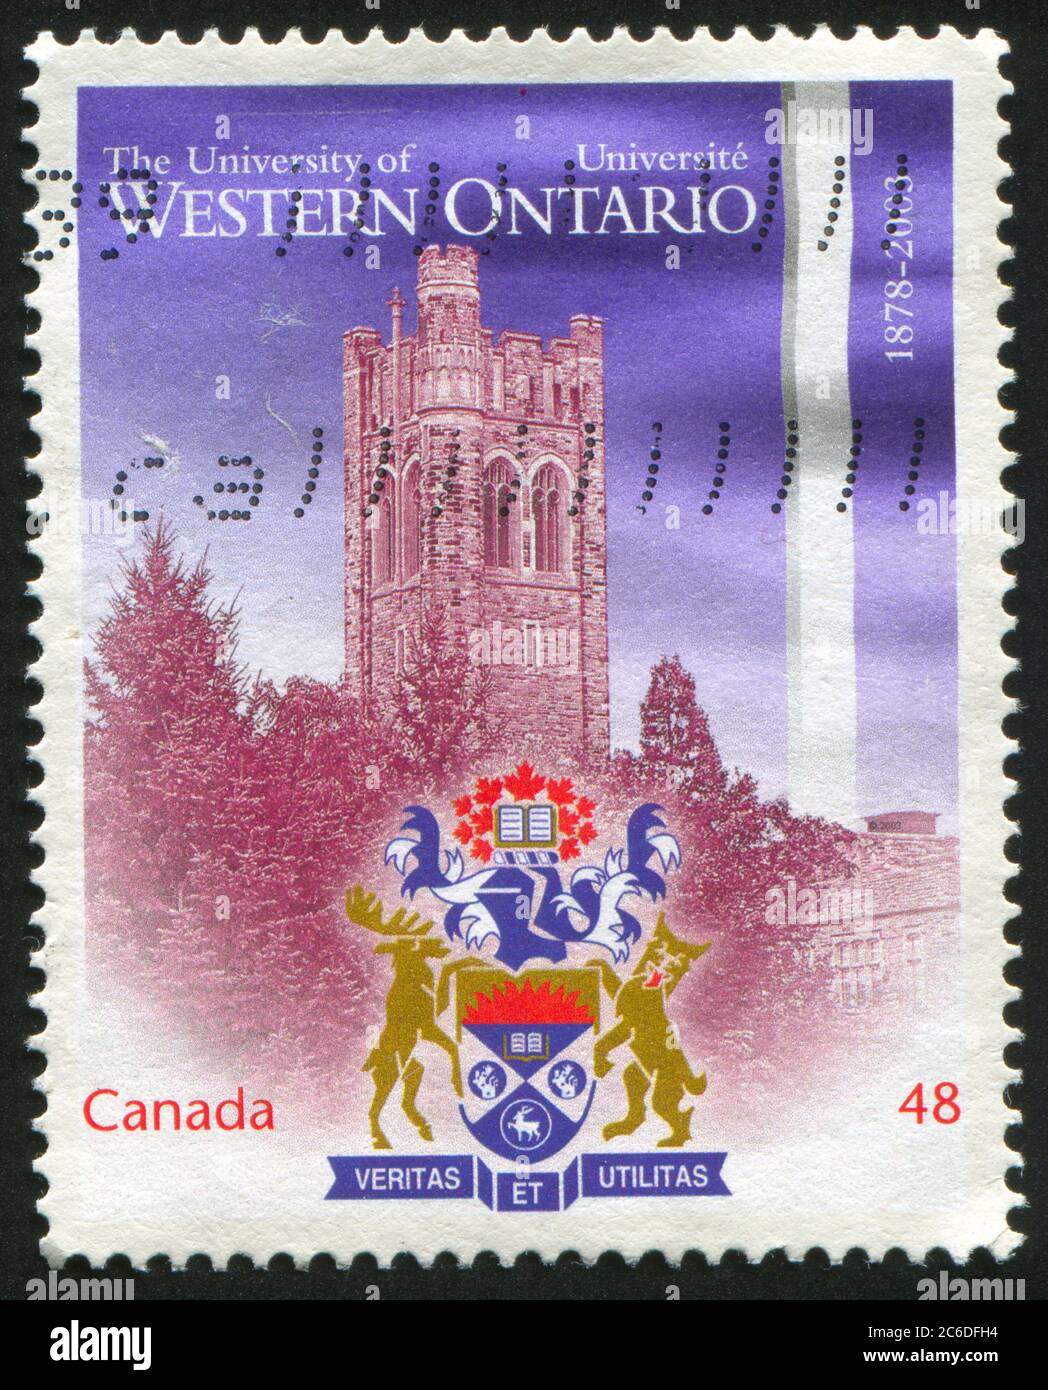 CANADA - CIRCA 2003: stamp printed by Canada, shows University of Western Ontario, London, Ont., 125th anniv., circa 2003 Stock Photo